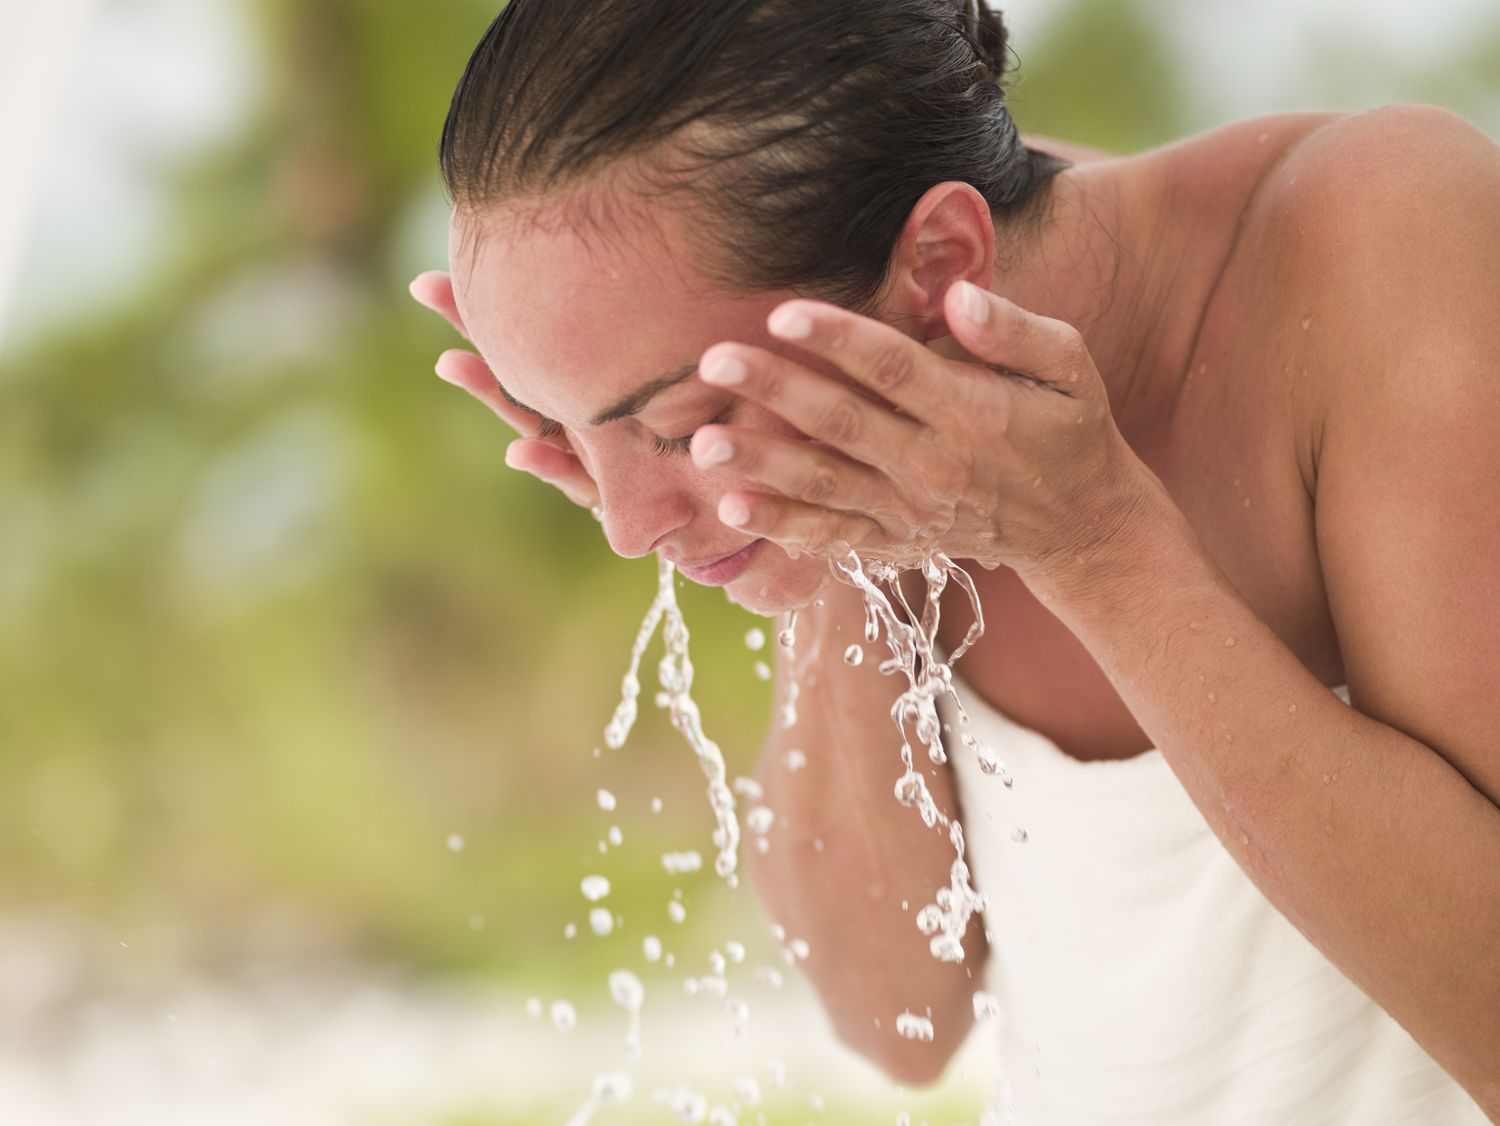 Woman washing her face in water